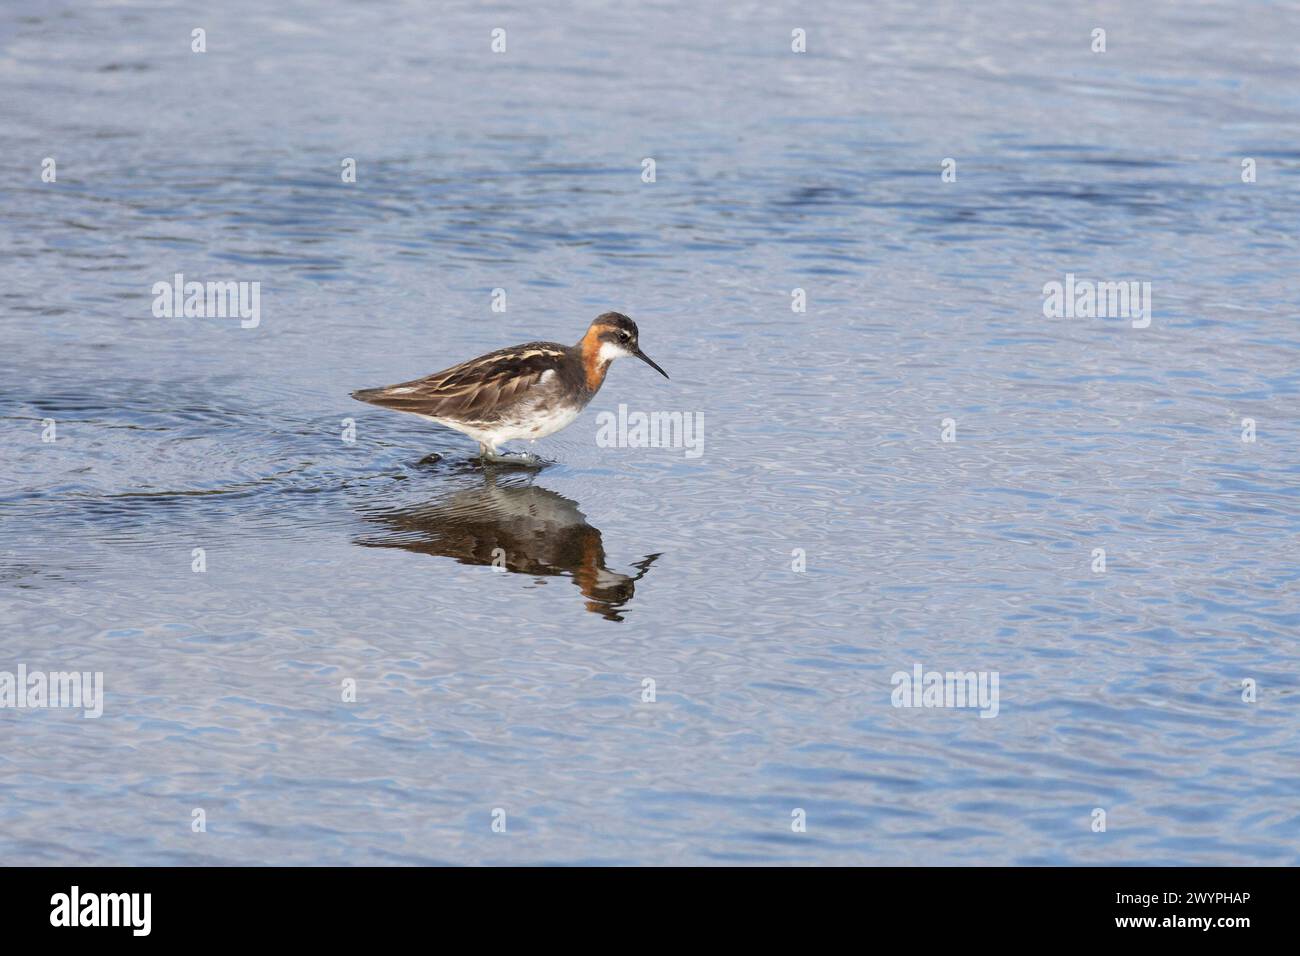 Red-necked phalarope stands in the water Stock Photo